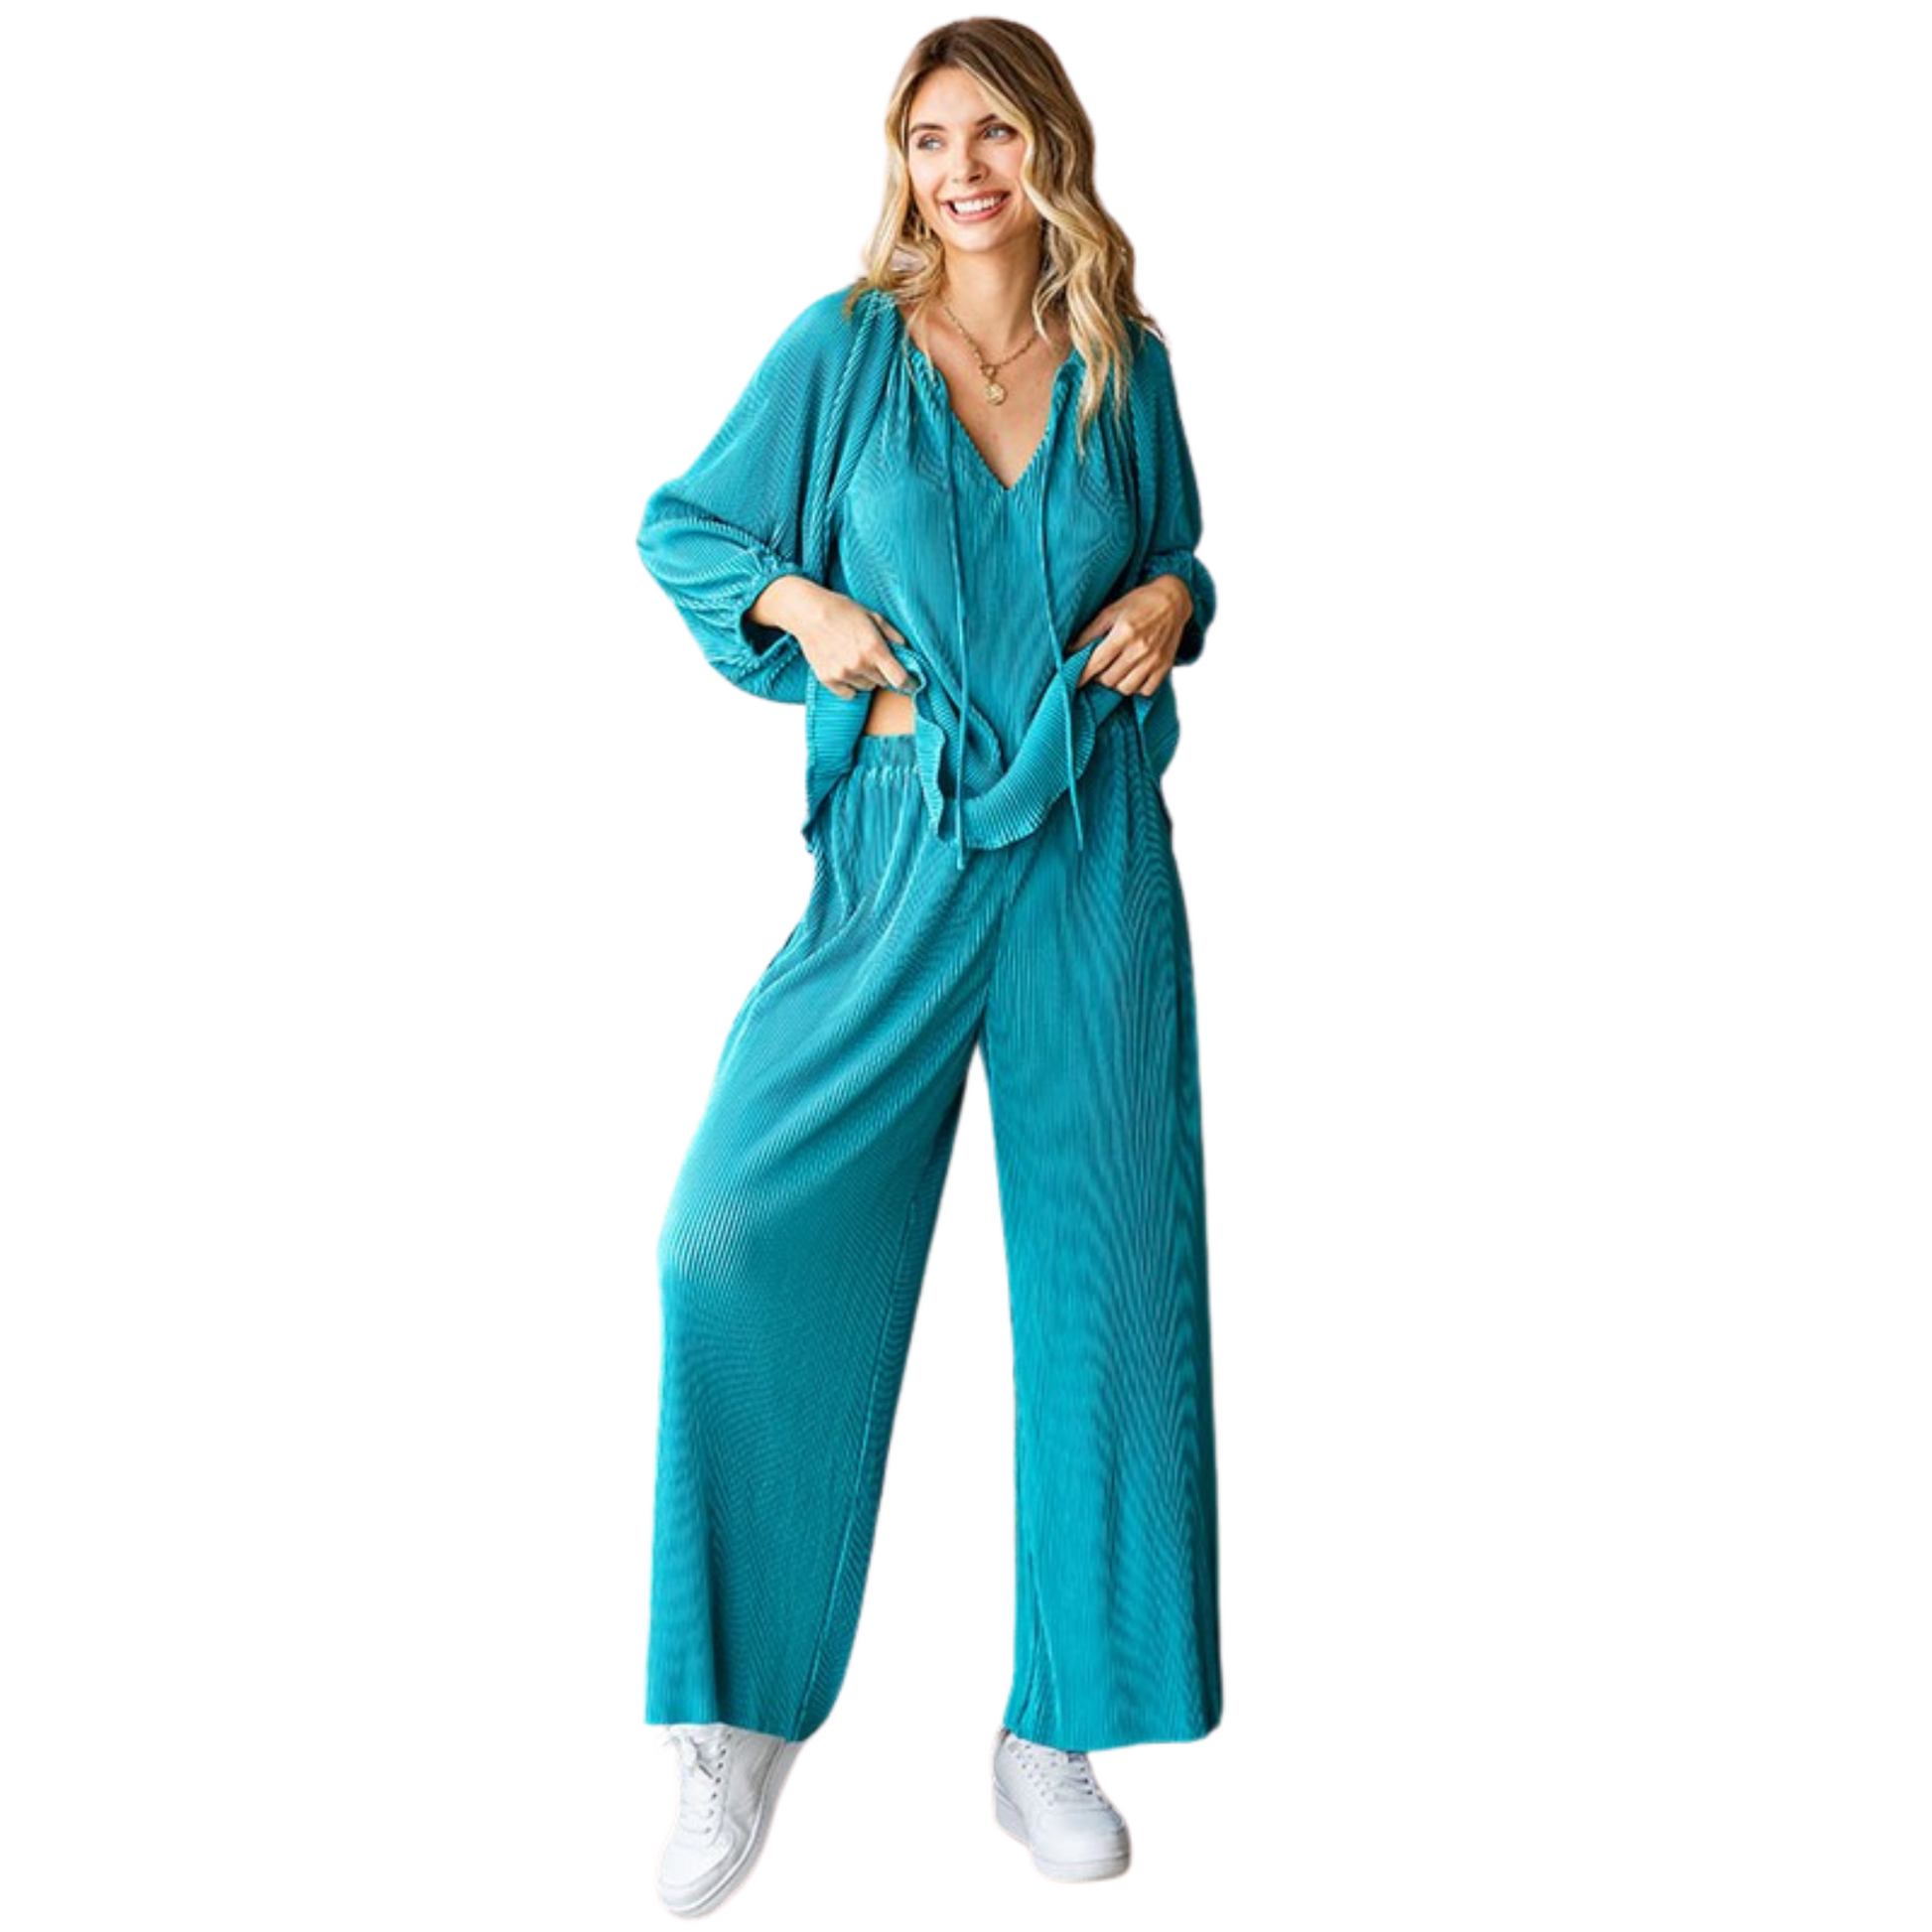 Effortlessly chic and comfortable, our Solid Color Pleated Top and Bottom Set is perfect for any occasion. The relaxed fit palazzo pants feature an elastic banded waistline for a flattering and comfortable fit. Paired with the matching top, this set is a must-have in your wardrobe. Available in a stunning teal color.